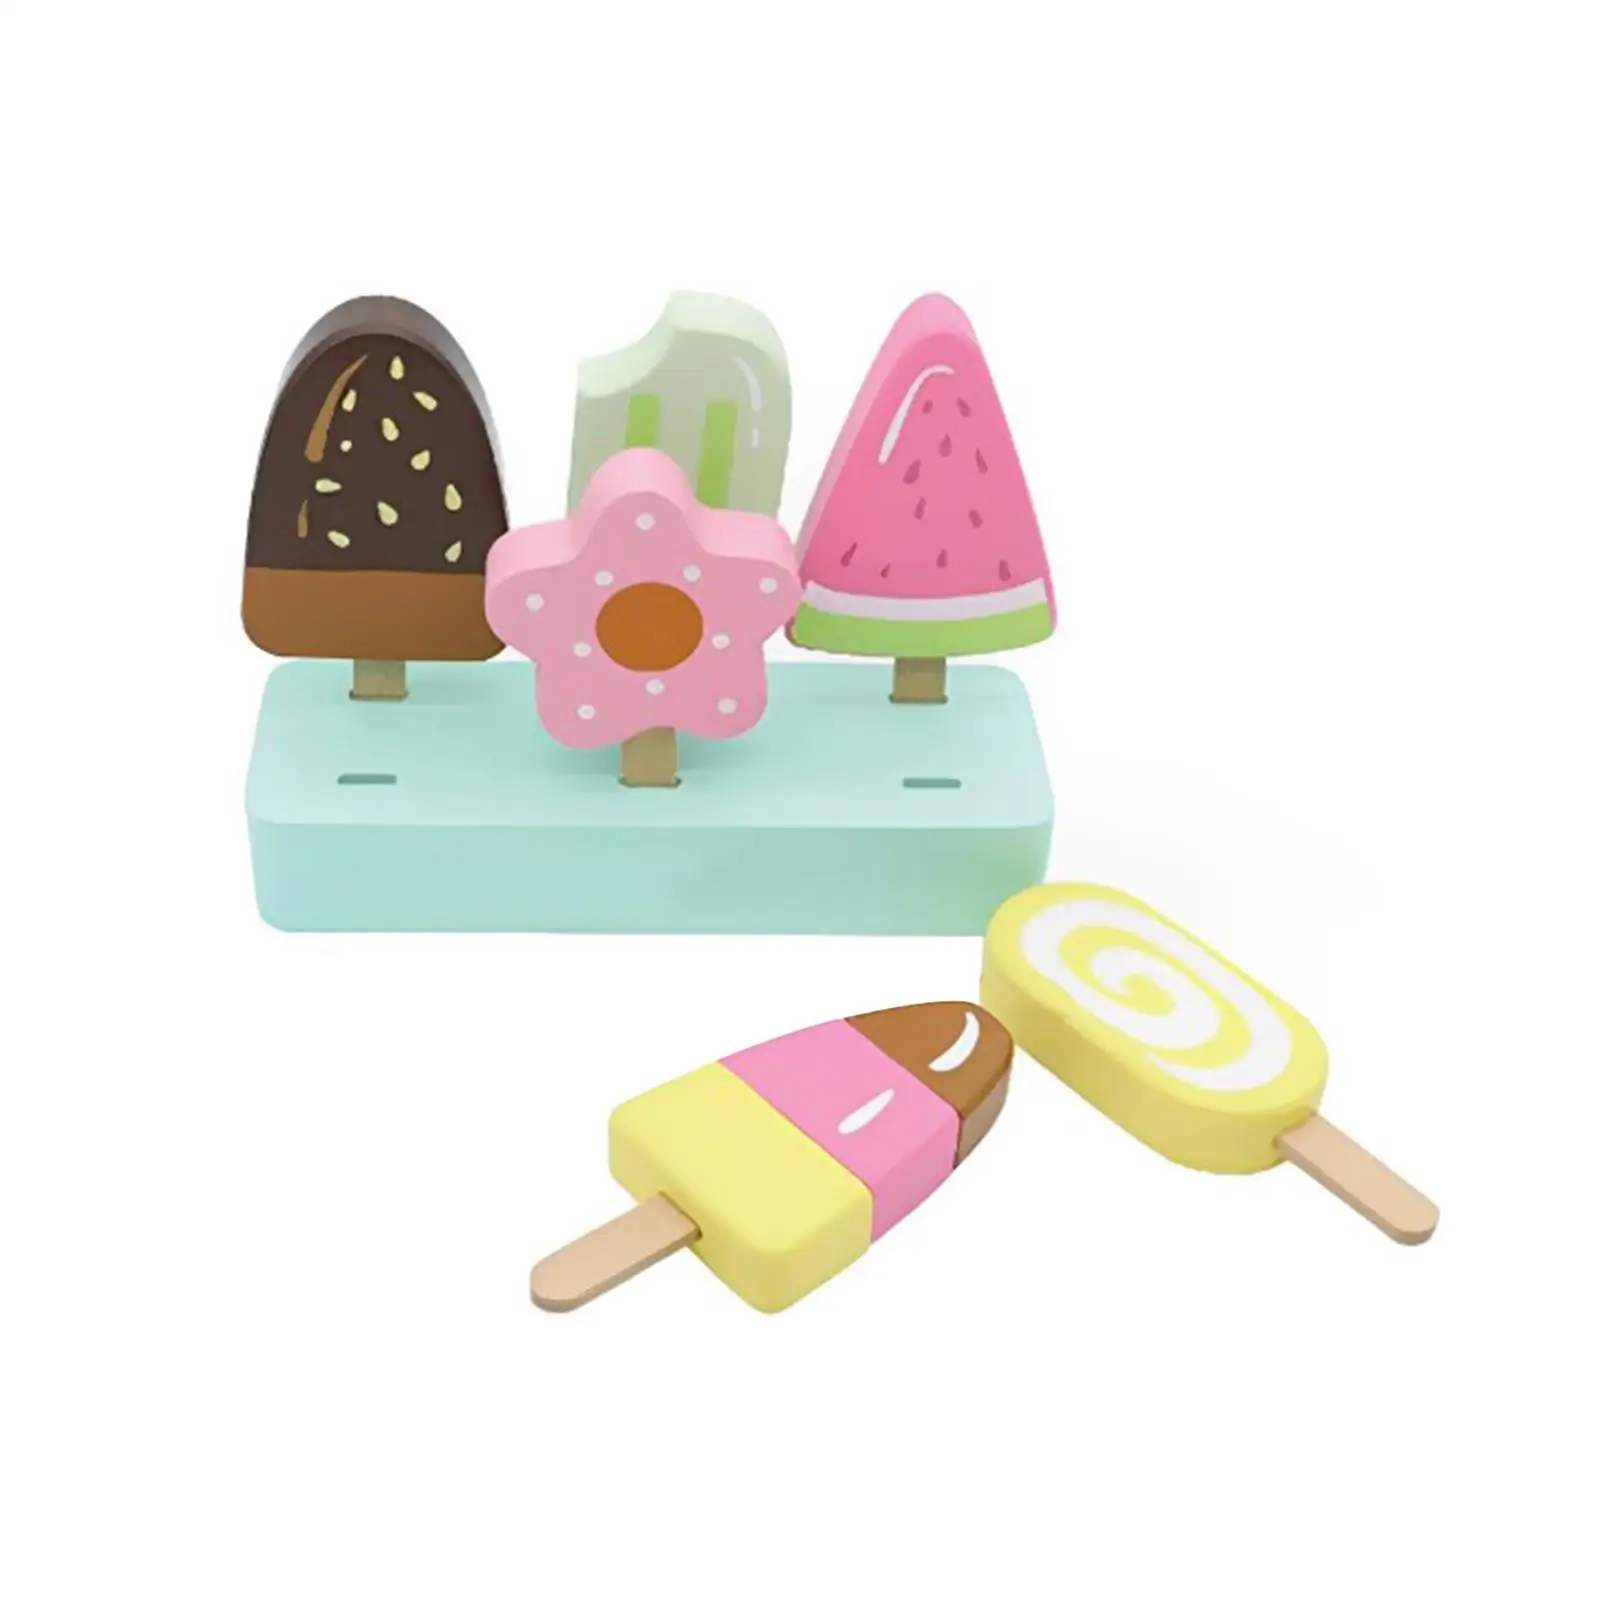 Ice Cream Toy Set Wooden Toy Education Toys with Wooden Popsicle Pretend Toy for Preschool Girls Boys Children Birthday Gifts